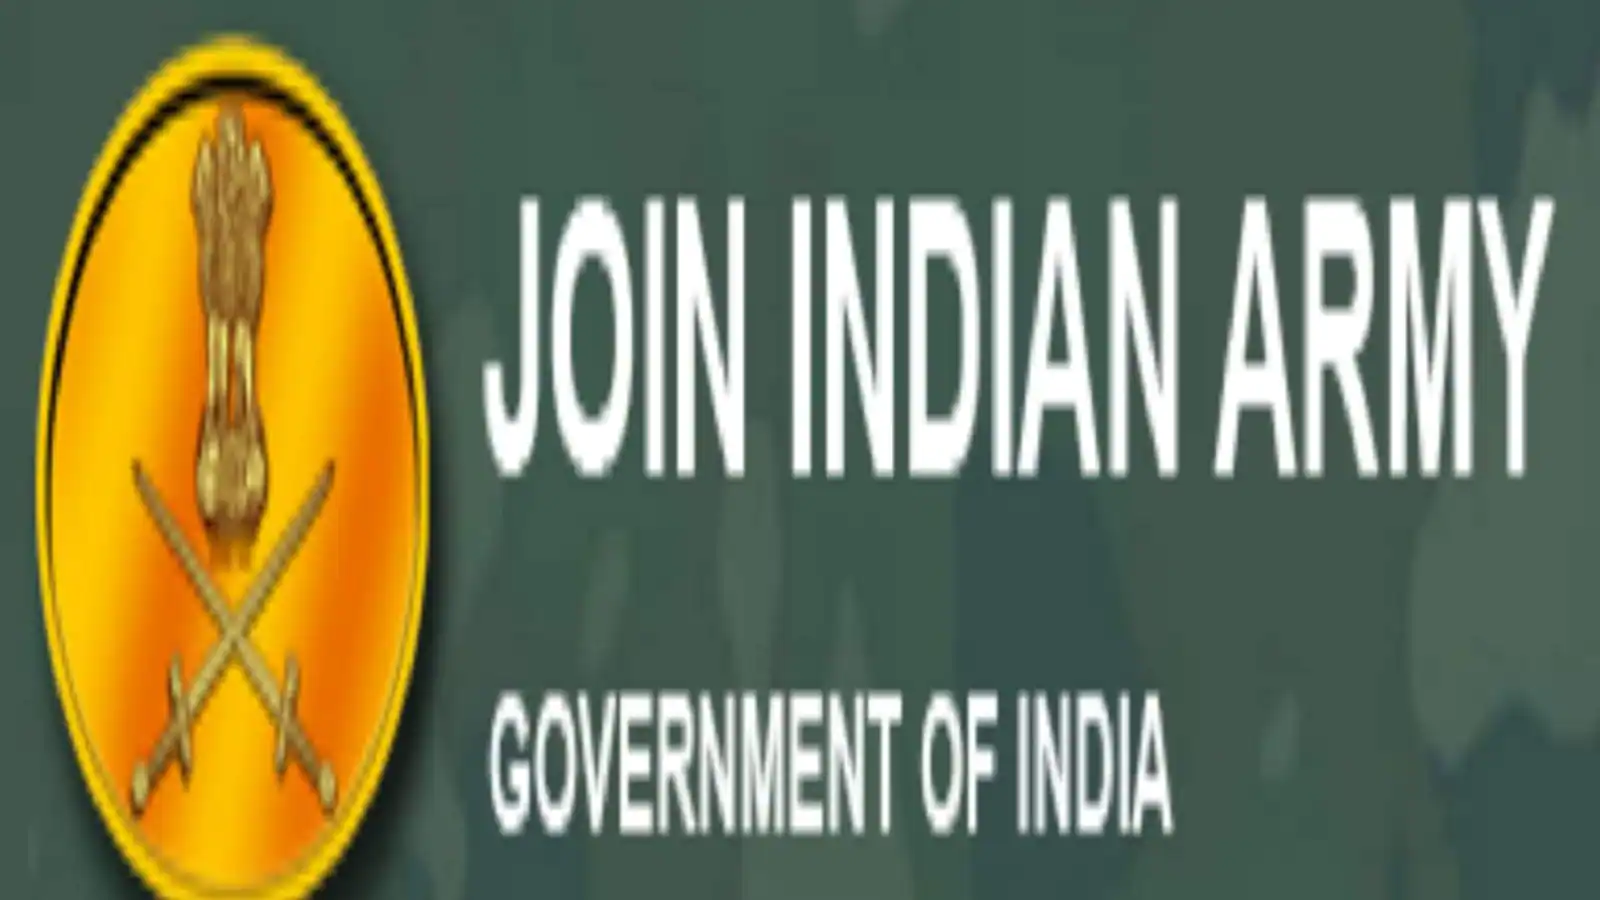 Indian Army SSC Tech recruitment 2022: Apply at joinindianarmy.nic.in